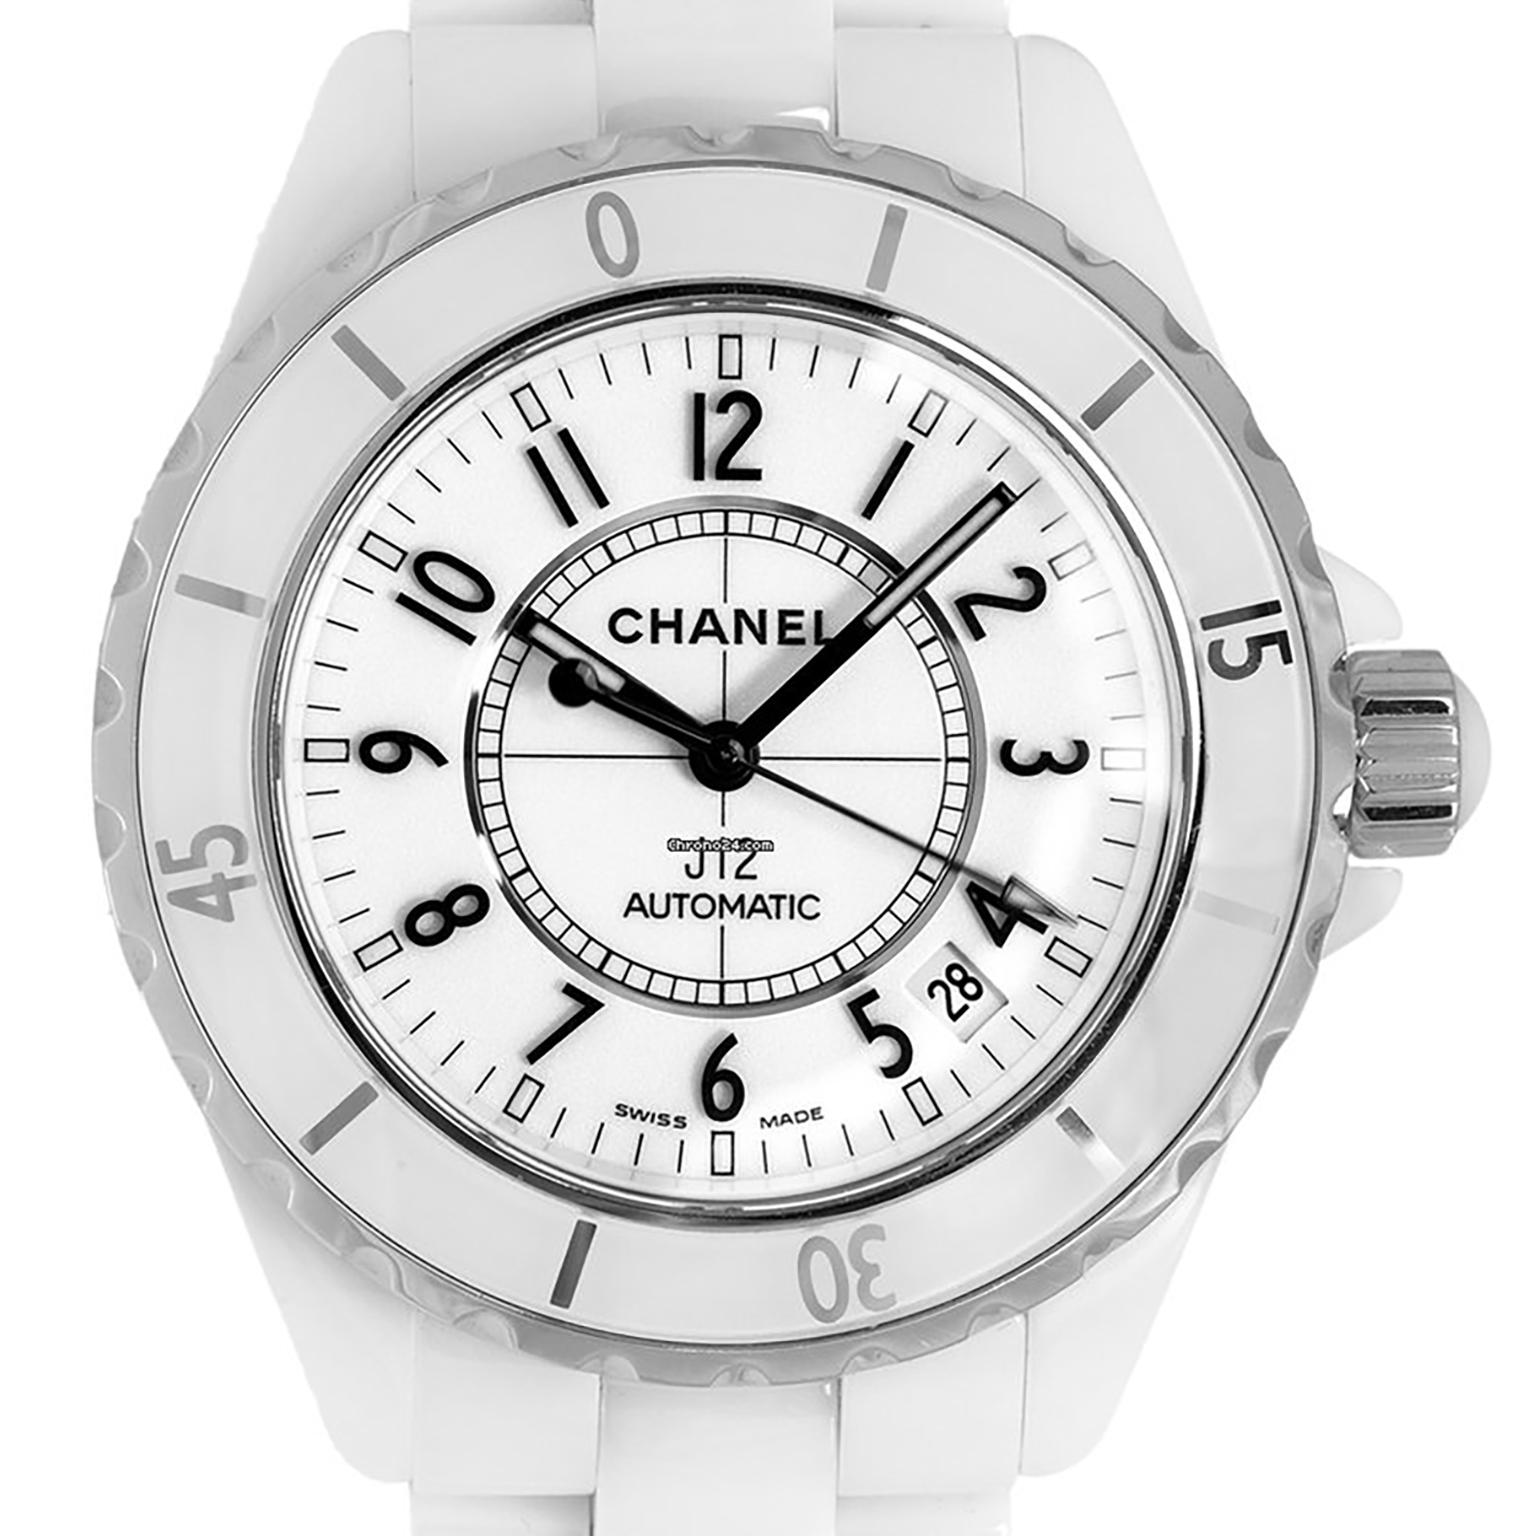 Pre-Owned Chanel J12 ceramic and stainless steel case with a ceramic bracelet. Fixed bezel. White dial with white hands and stainless steel index - Arabic numerals hour markers. Dial Type: Analog. Date display between 4 o'clock and 5 o'clock